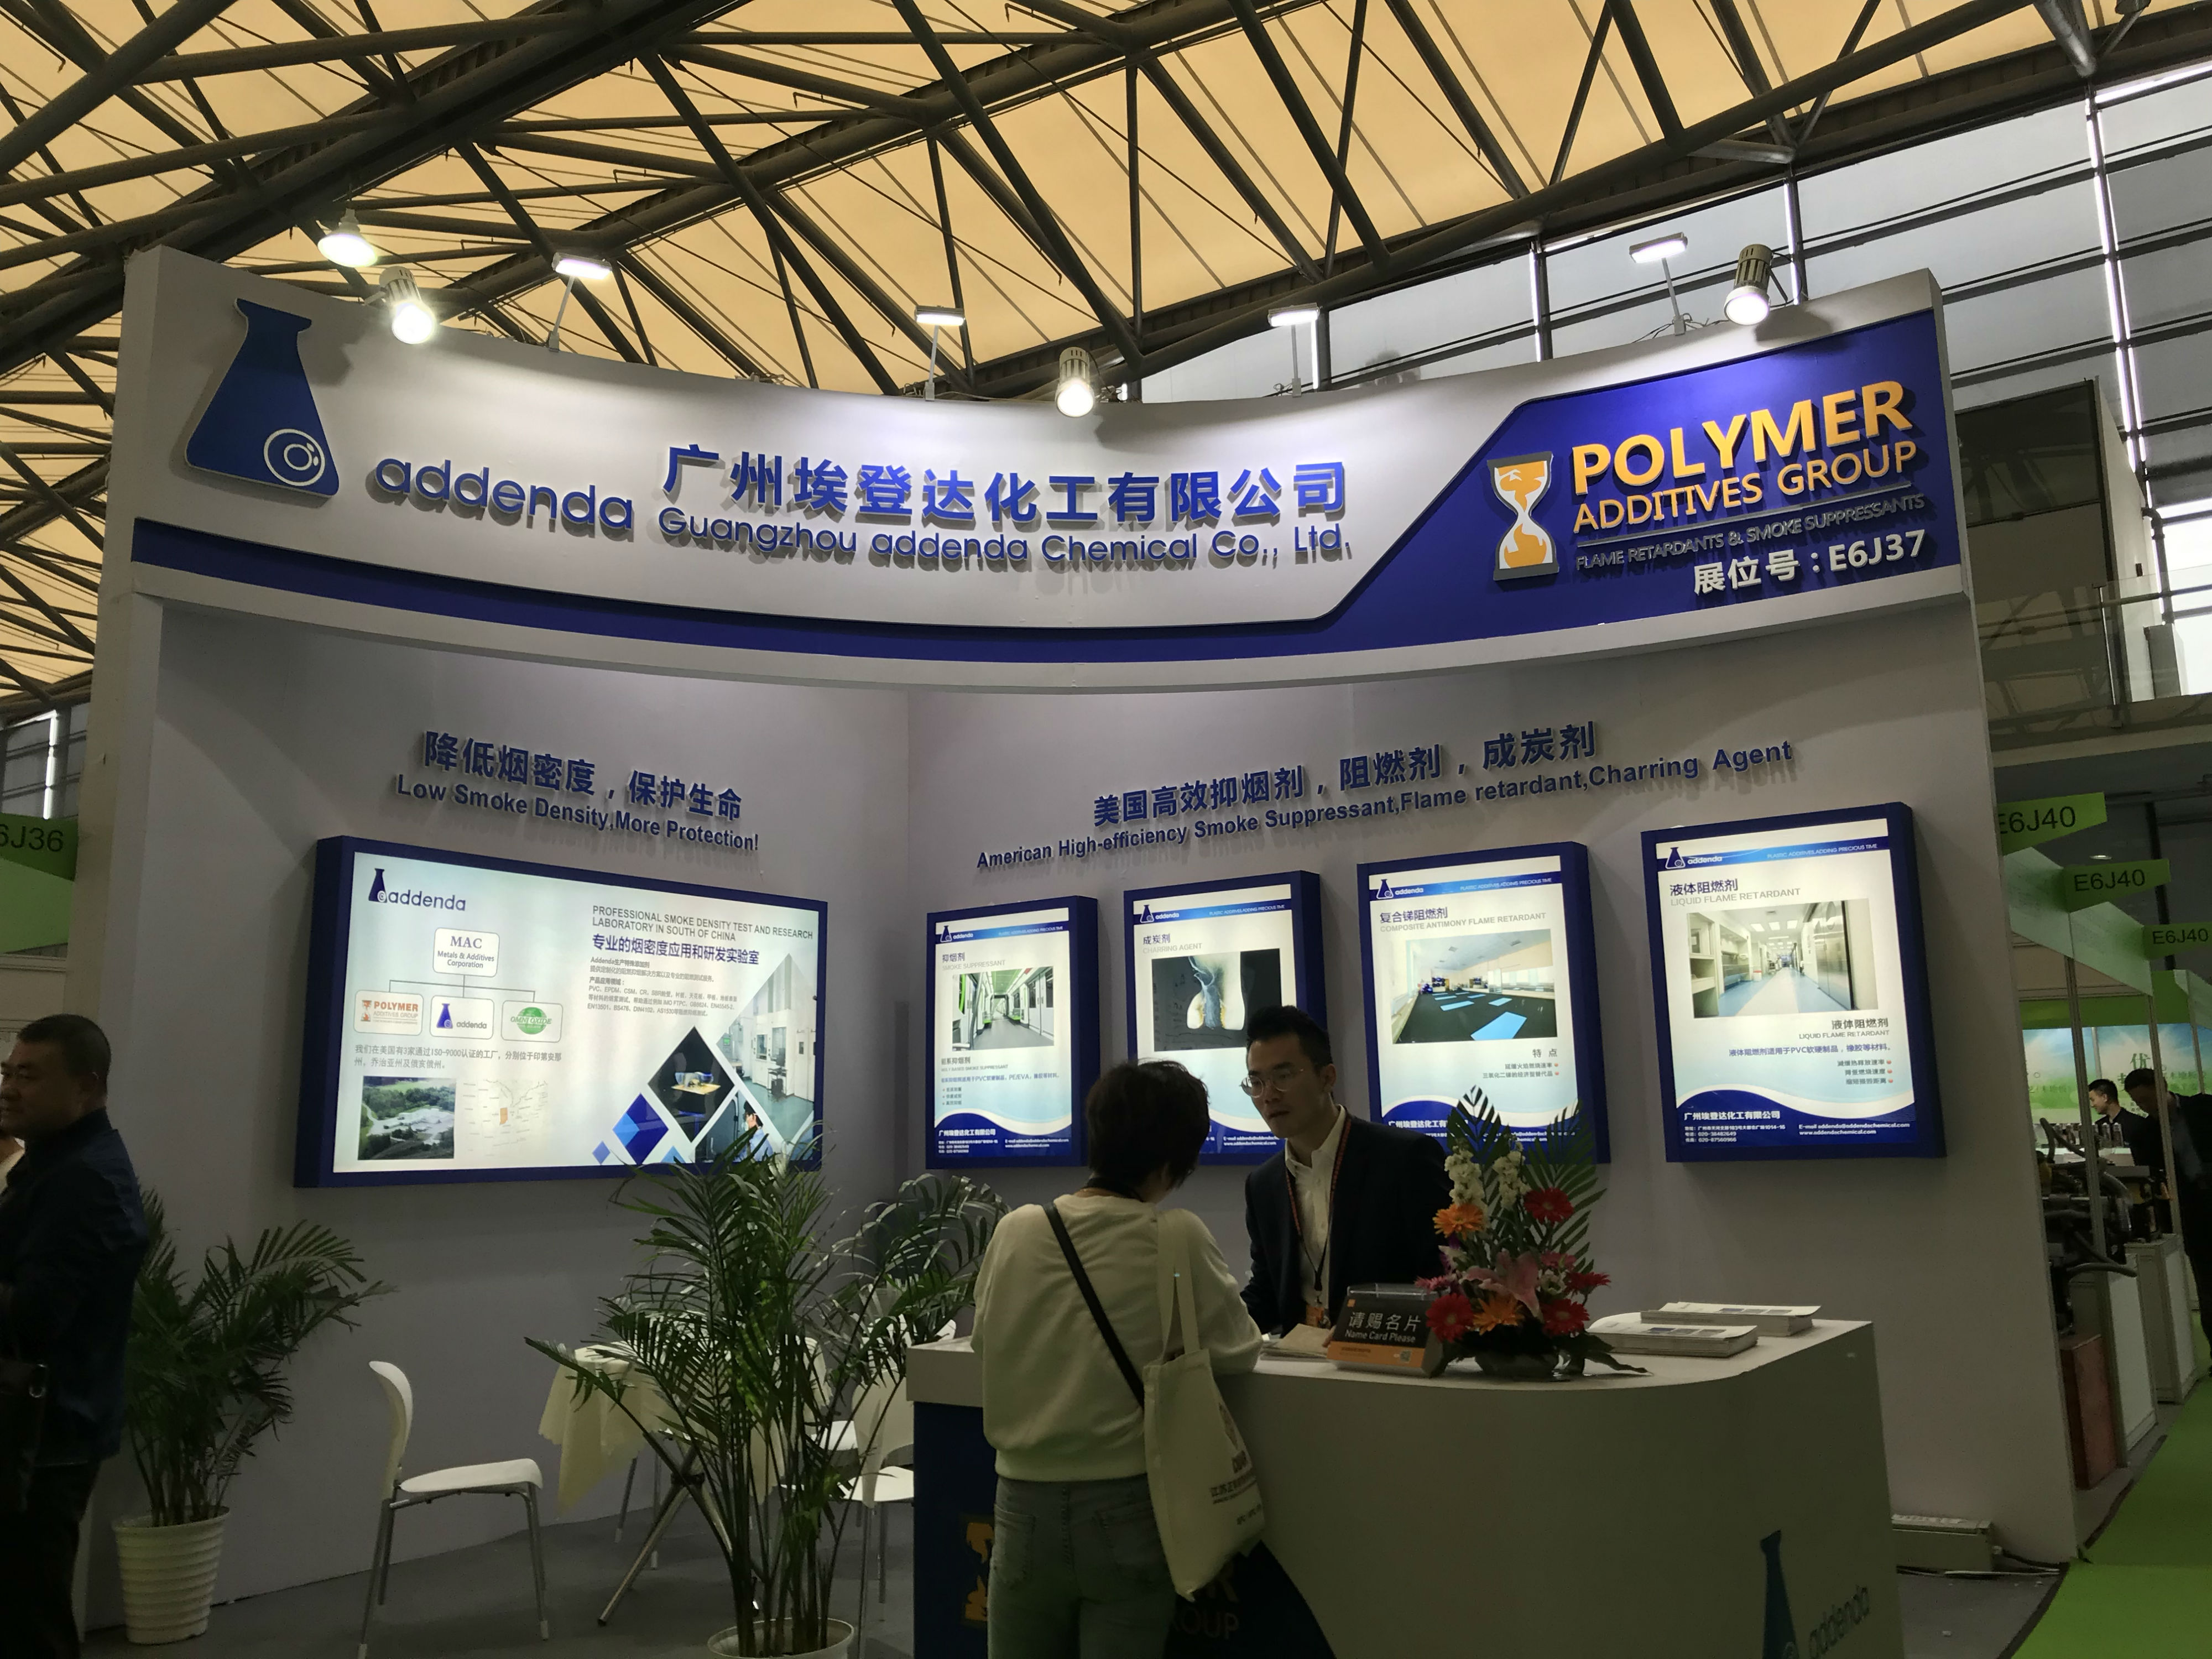 Addenda participated in the 21st China International Ground Material Exhibition (Shanghai) in March 2019